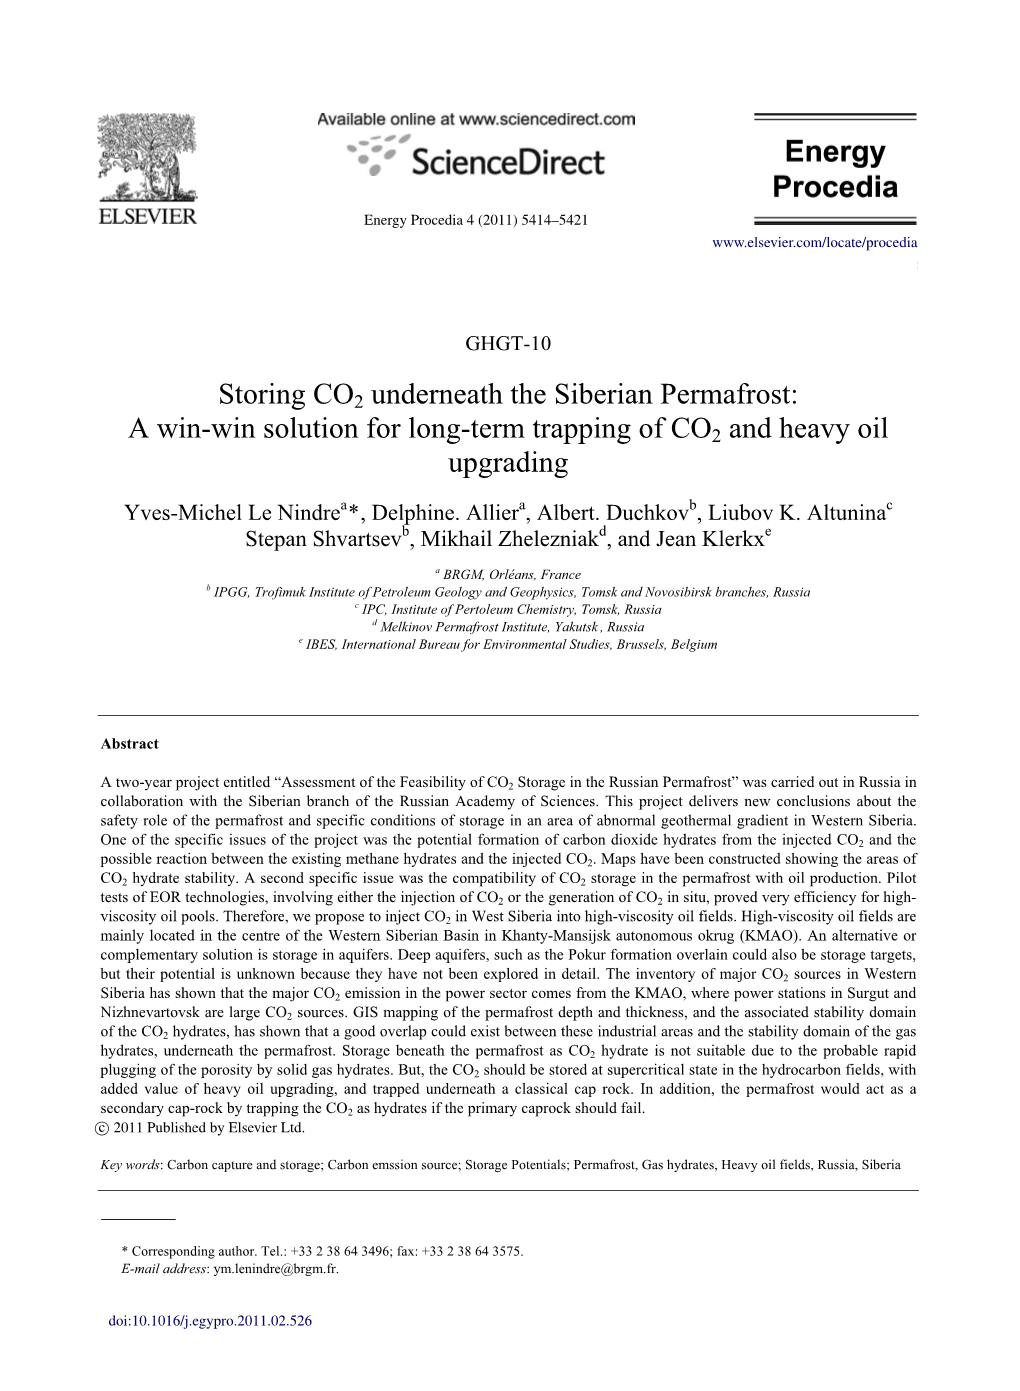 Storing CO2 Underneath the Siberian Permafrost: a Win-Win Solution for Long-Term Trapping of CO2 and Heavy Oil Upgrading